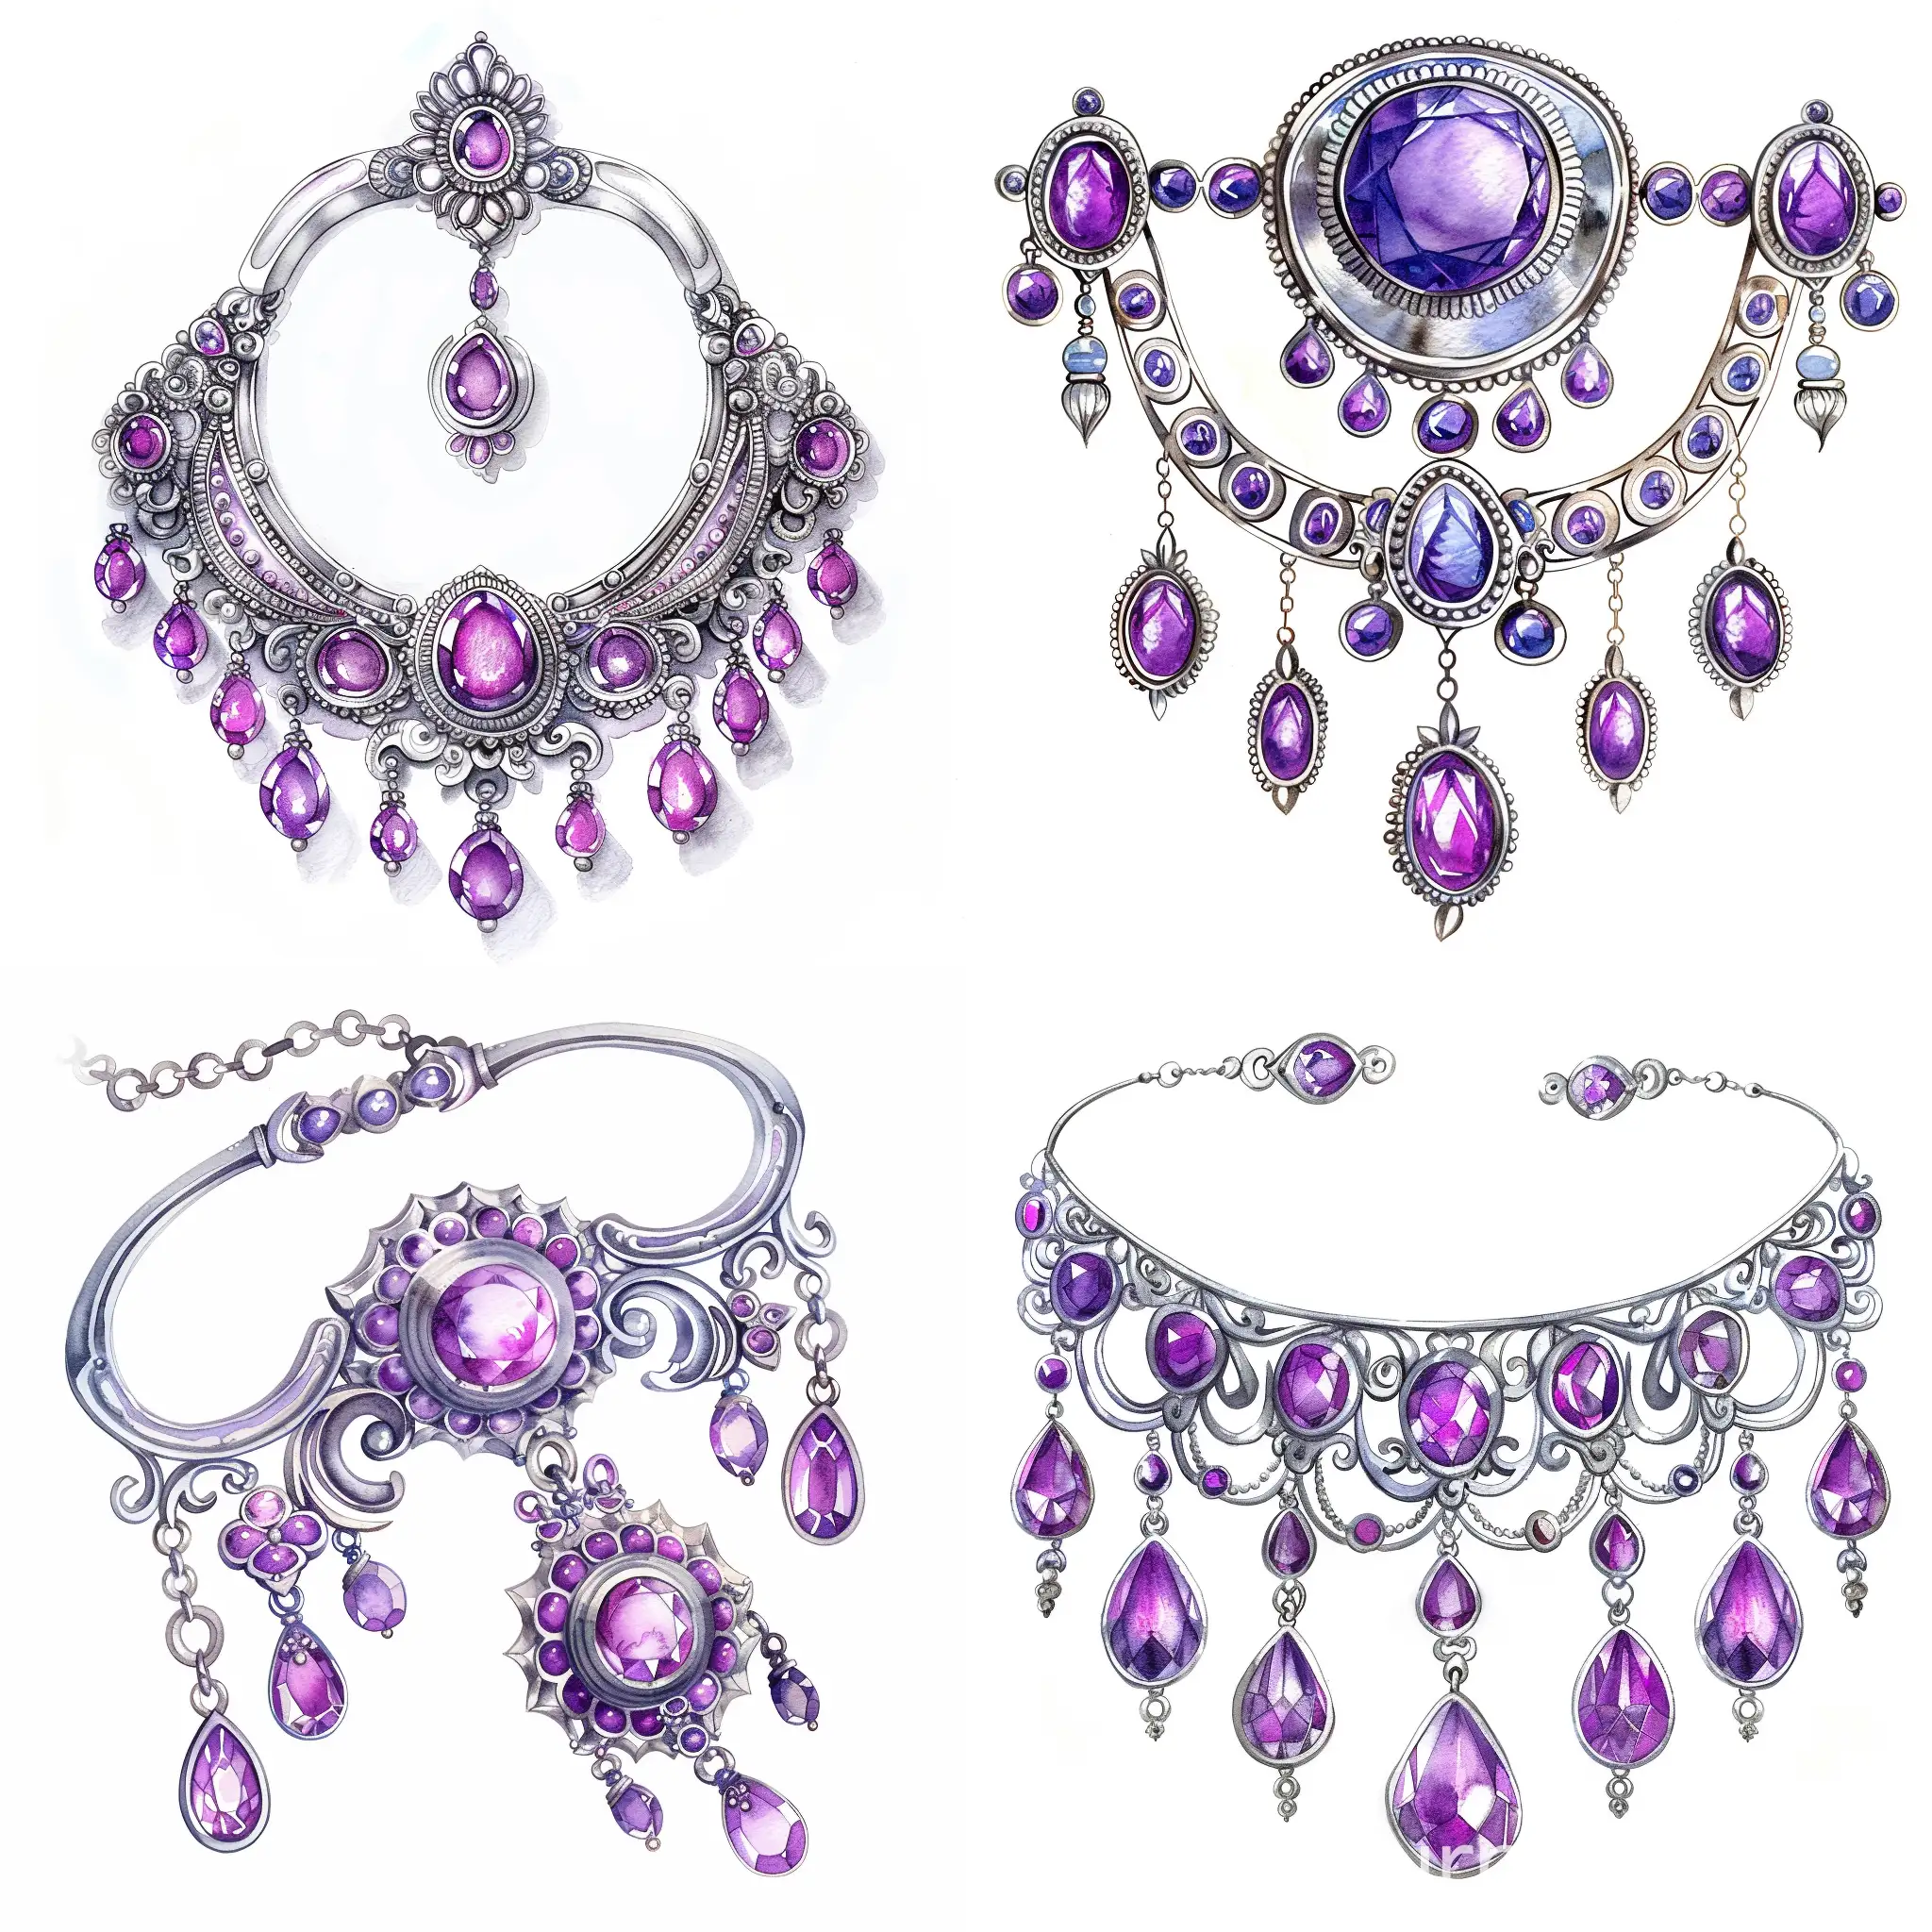 watercolor, handrawn, detailed, delicate, silver, and purple sapphire gemstone Maang Tikka, indian wedding, indian wedding jewelry, indian wedding accessories clip art, isolated on white background, no shadows